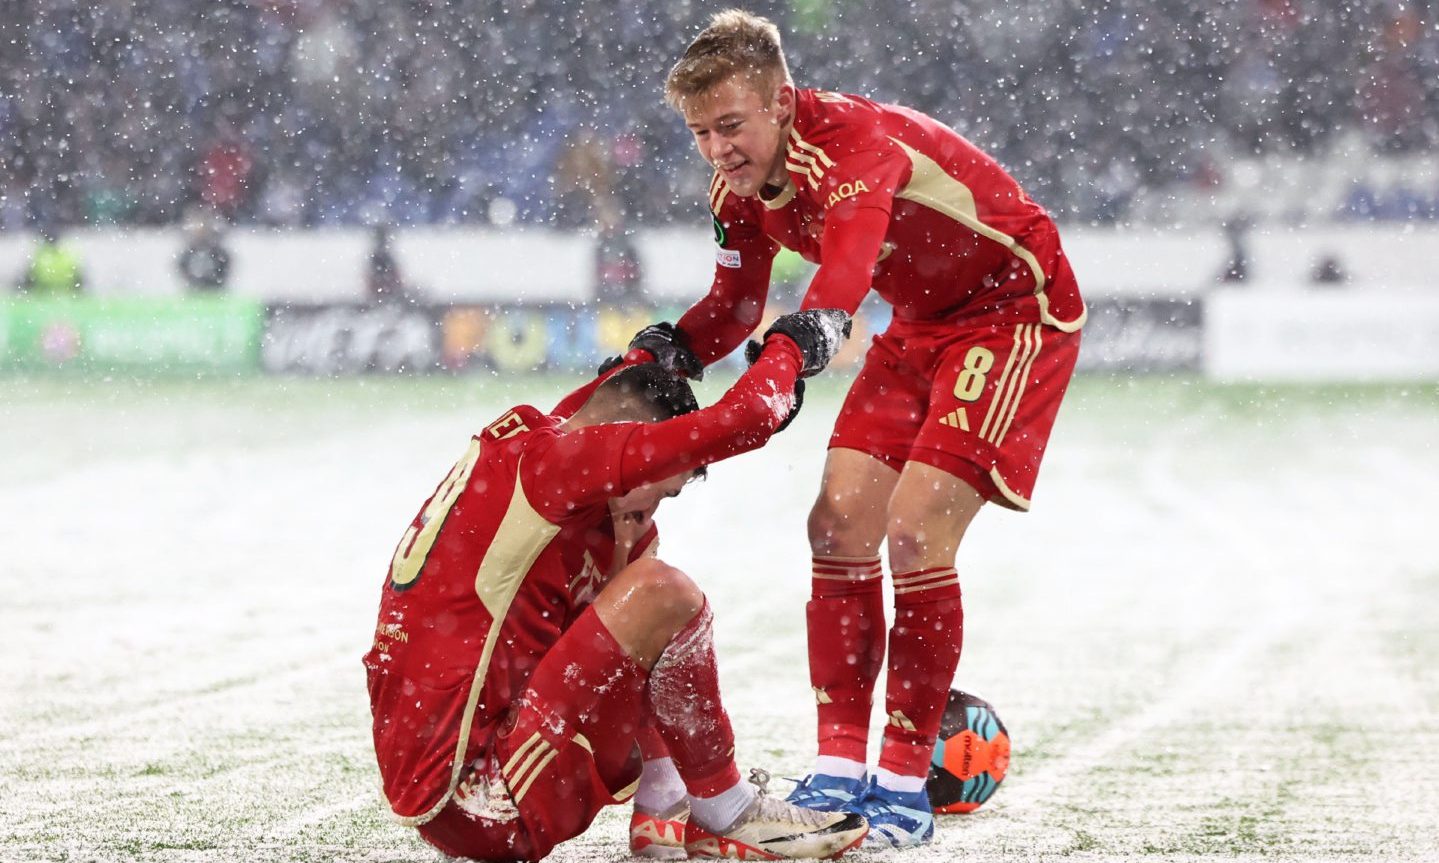 Aberdeen's Connor Barron helps his team mate Ester Sokler in the snow